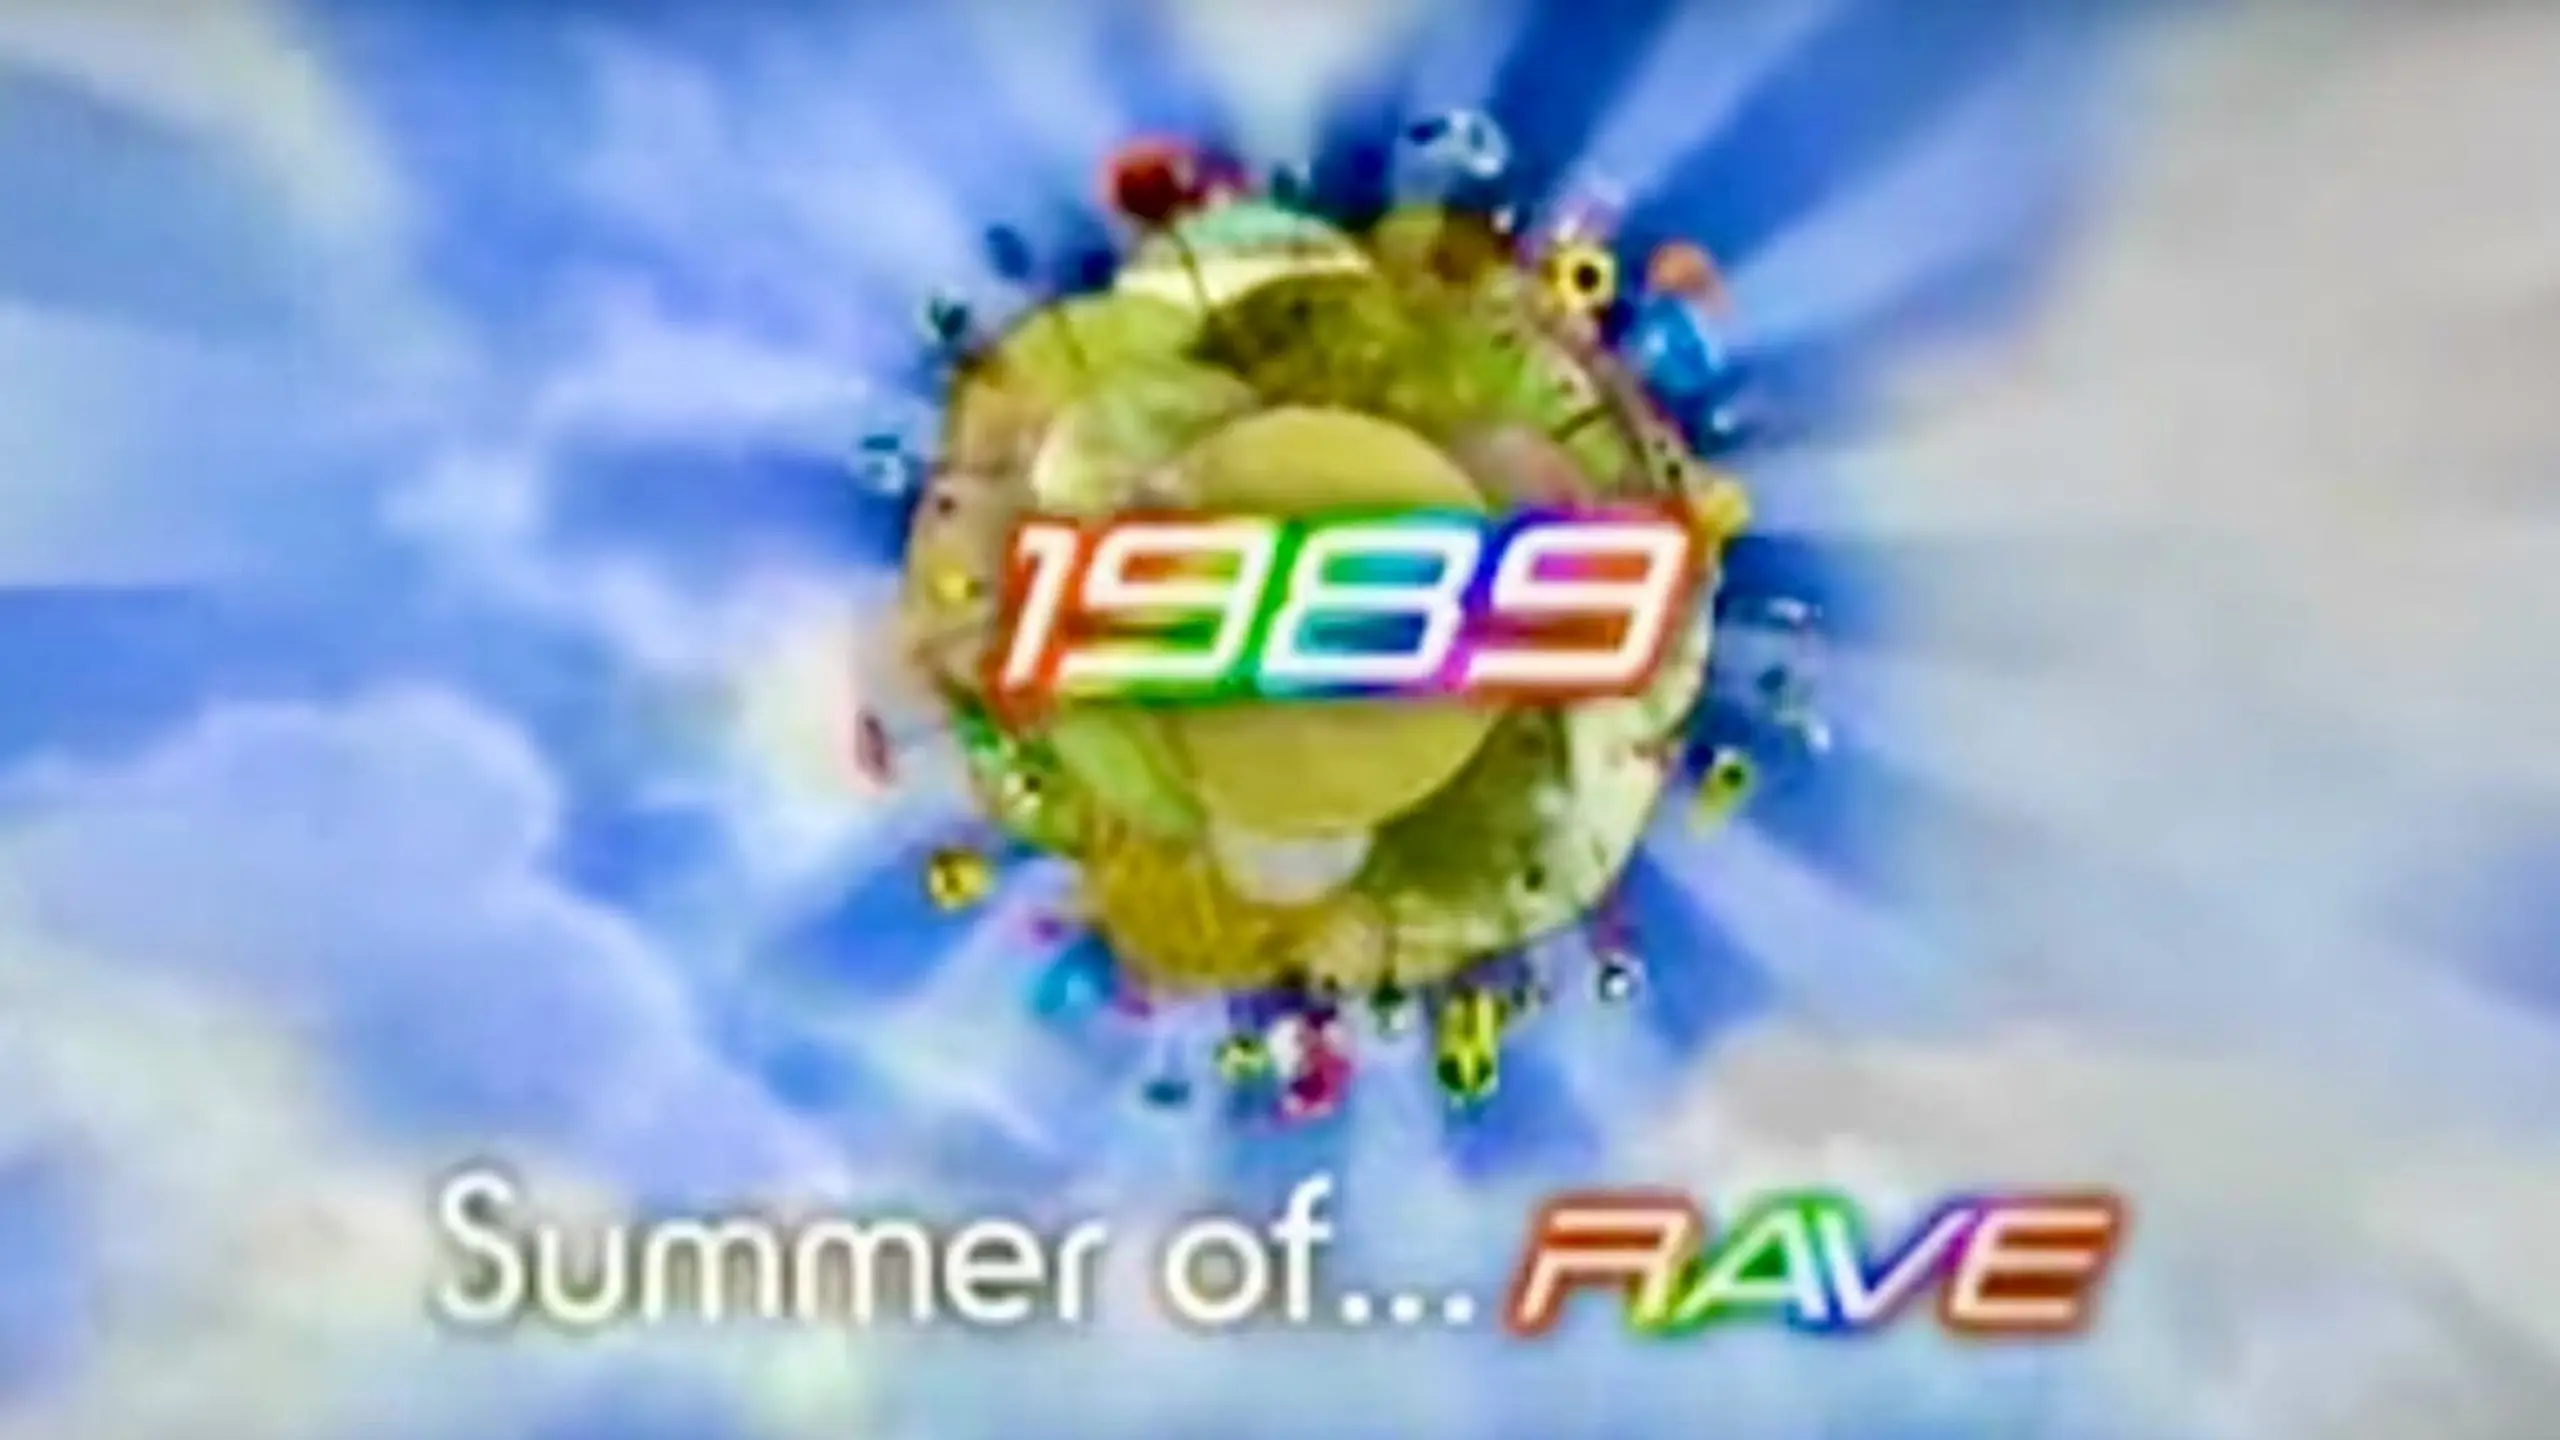 The Summer of Rave, 1989